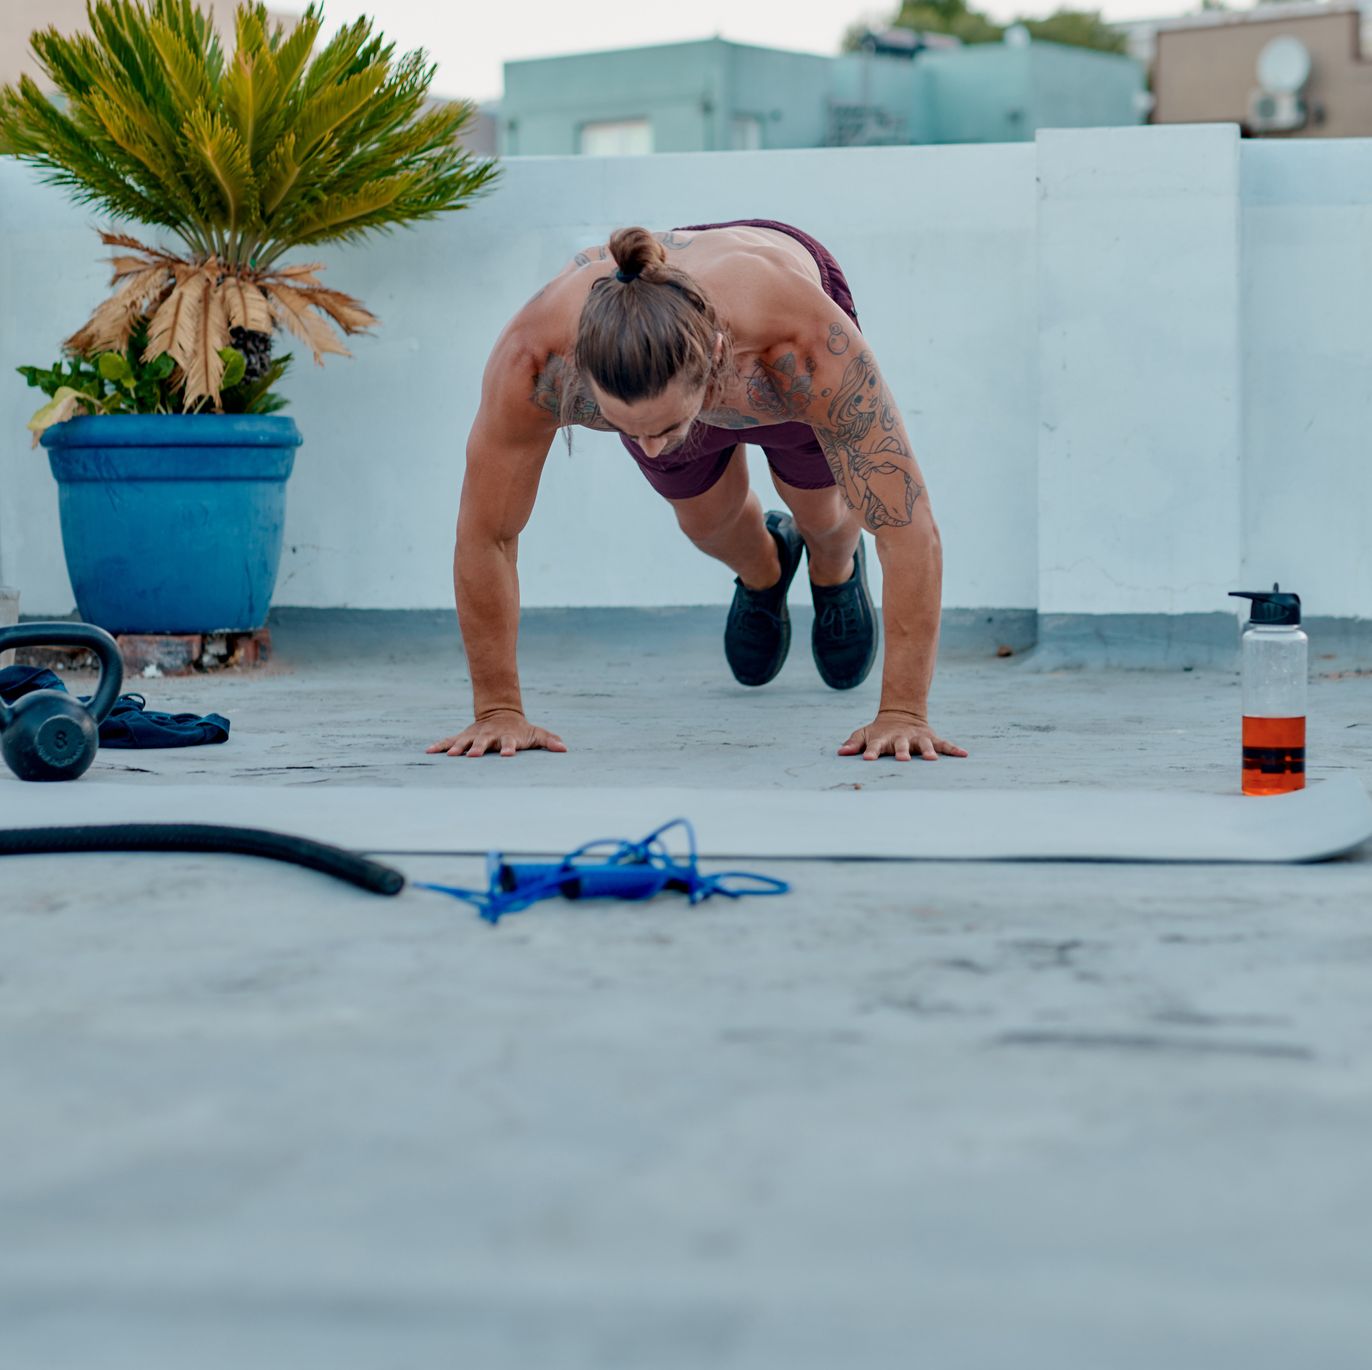 Burpees Are Overrated. Try These 3 Alternatives Instead.